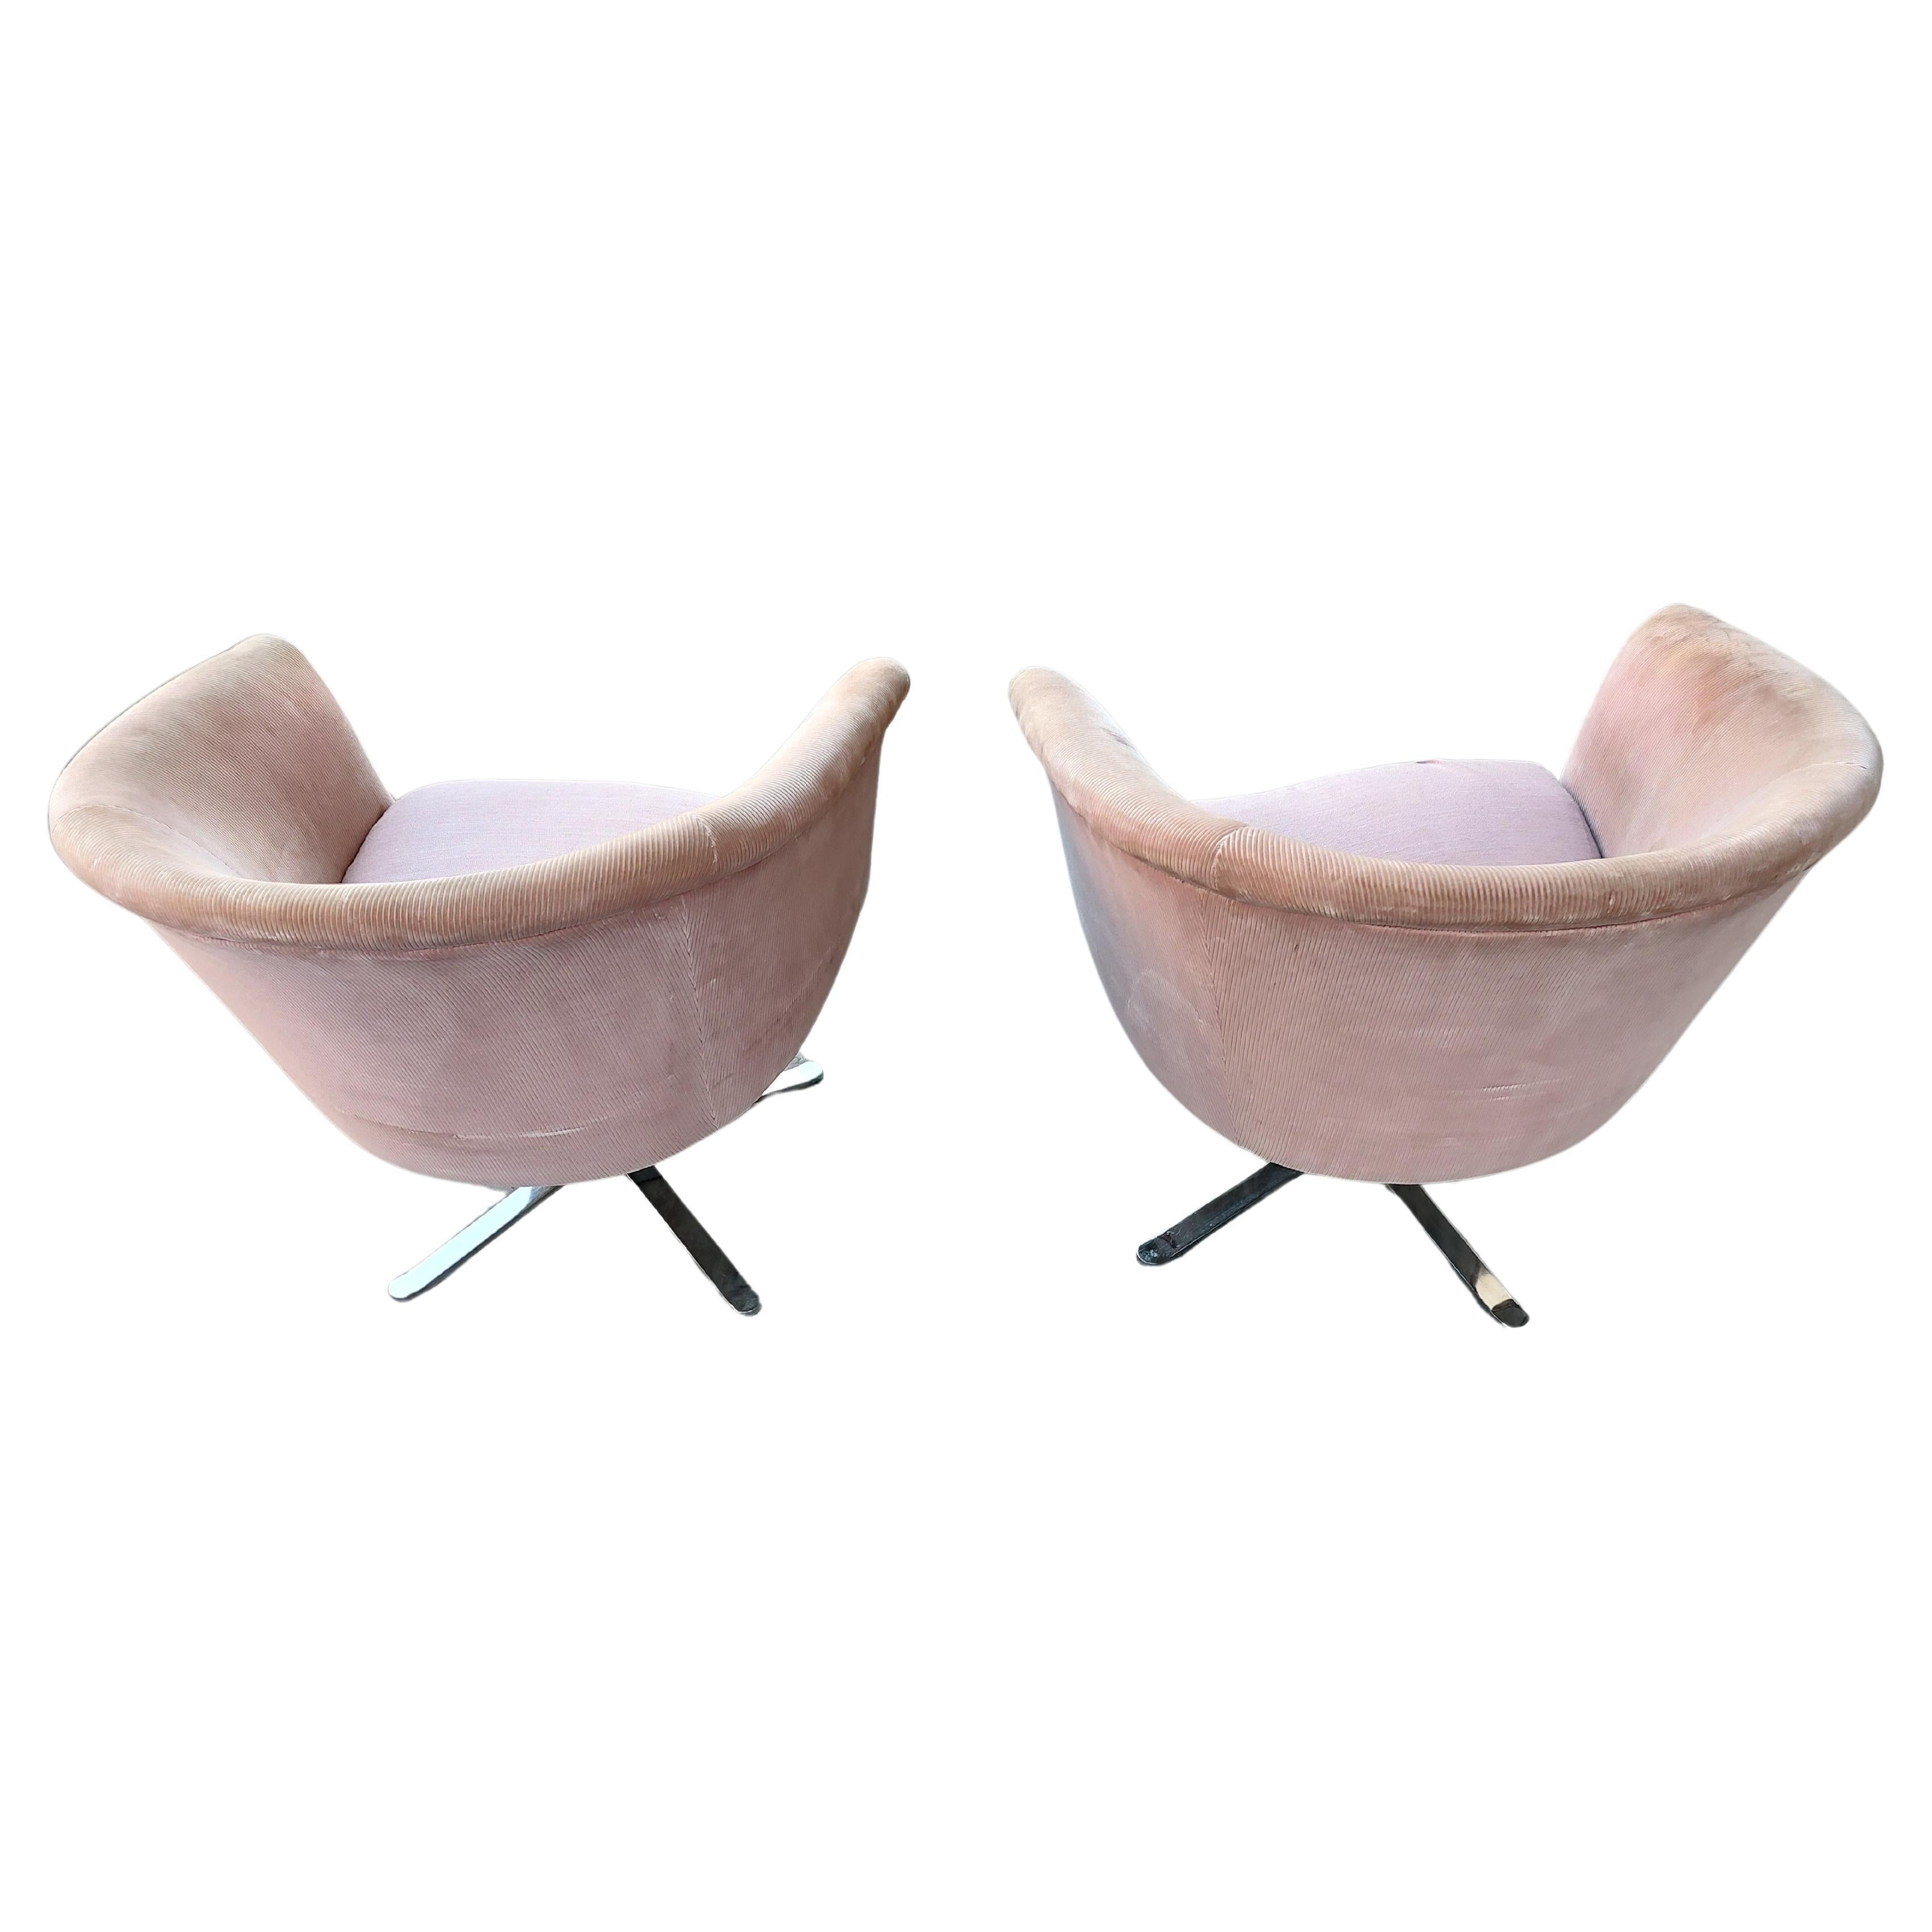 Fabulous pair of barrel back swivel chairs in a dusty rose corduroy. Heavy and well designed with a chromed four leg system that balances and looks amazing. Fabric is serviceable but has faded with time and still looks good. Has a ball point pen